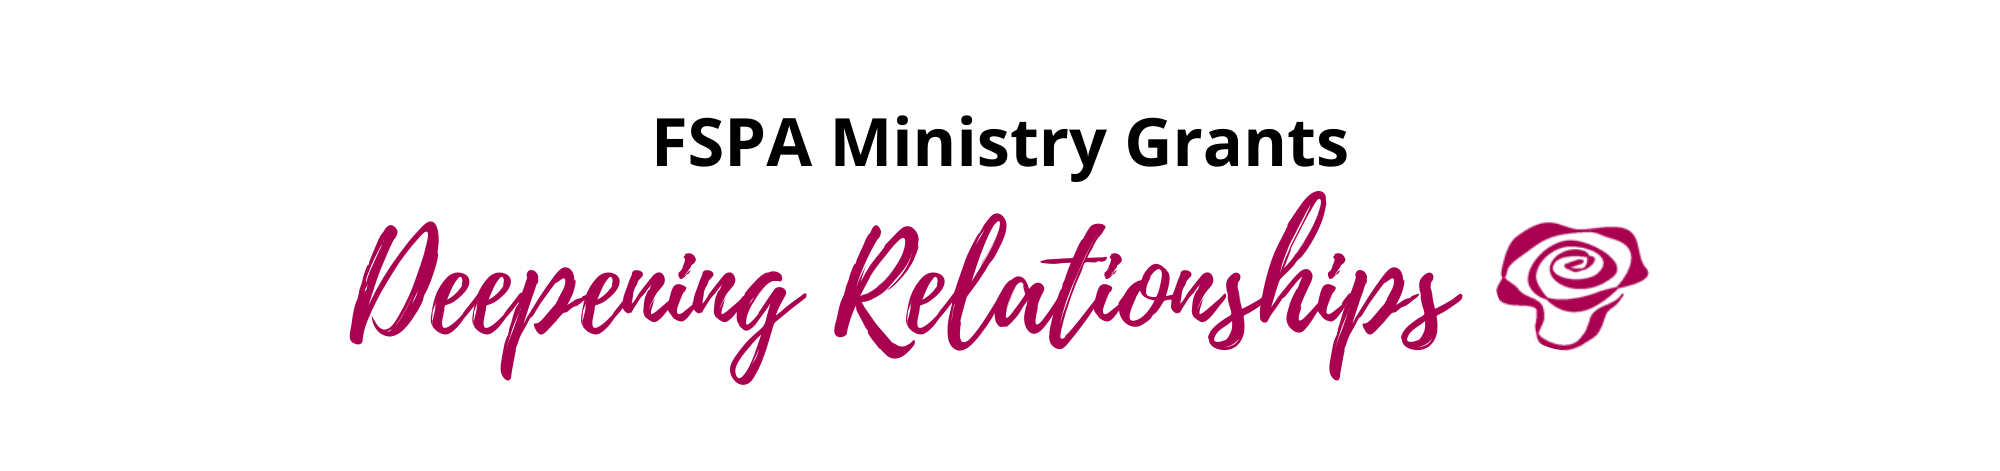 FSPA Ministry Grant Fund Committee Deepening Relationships logo